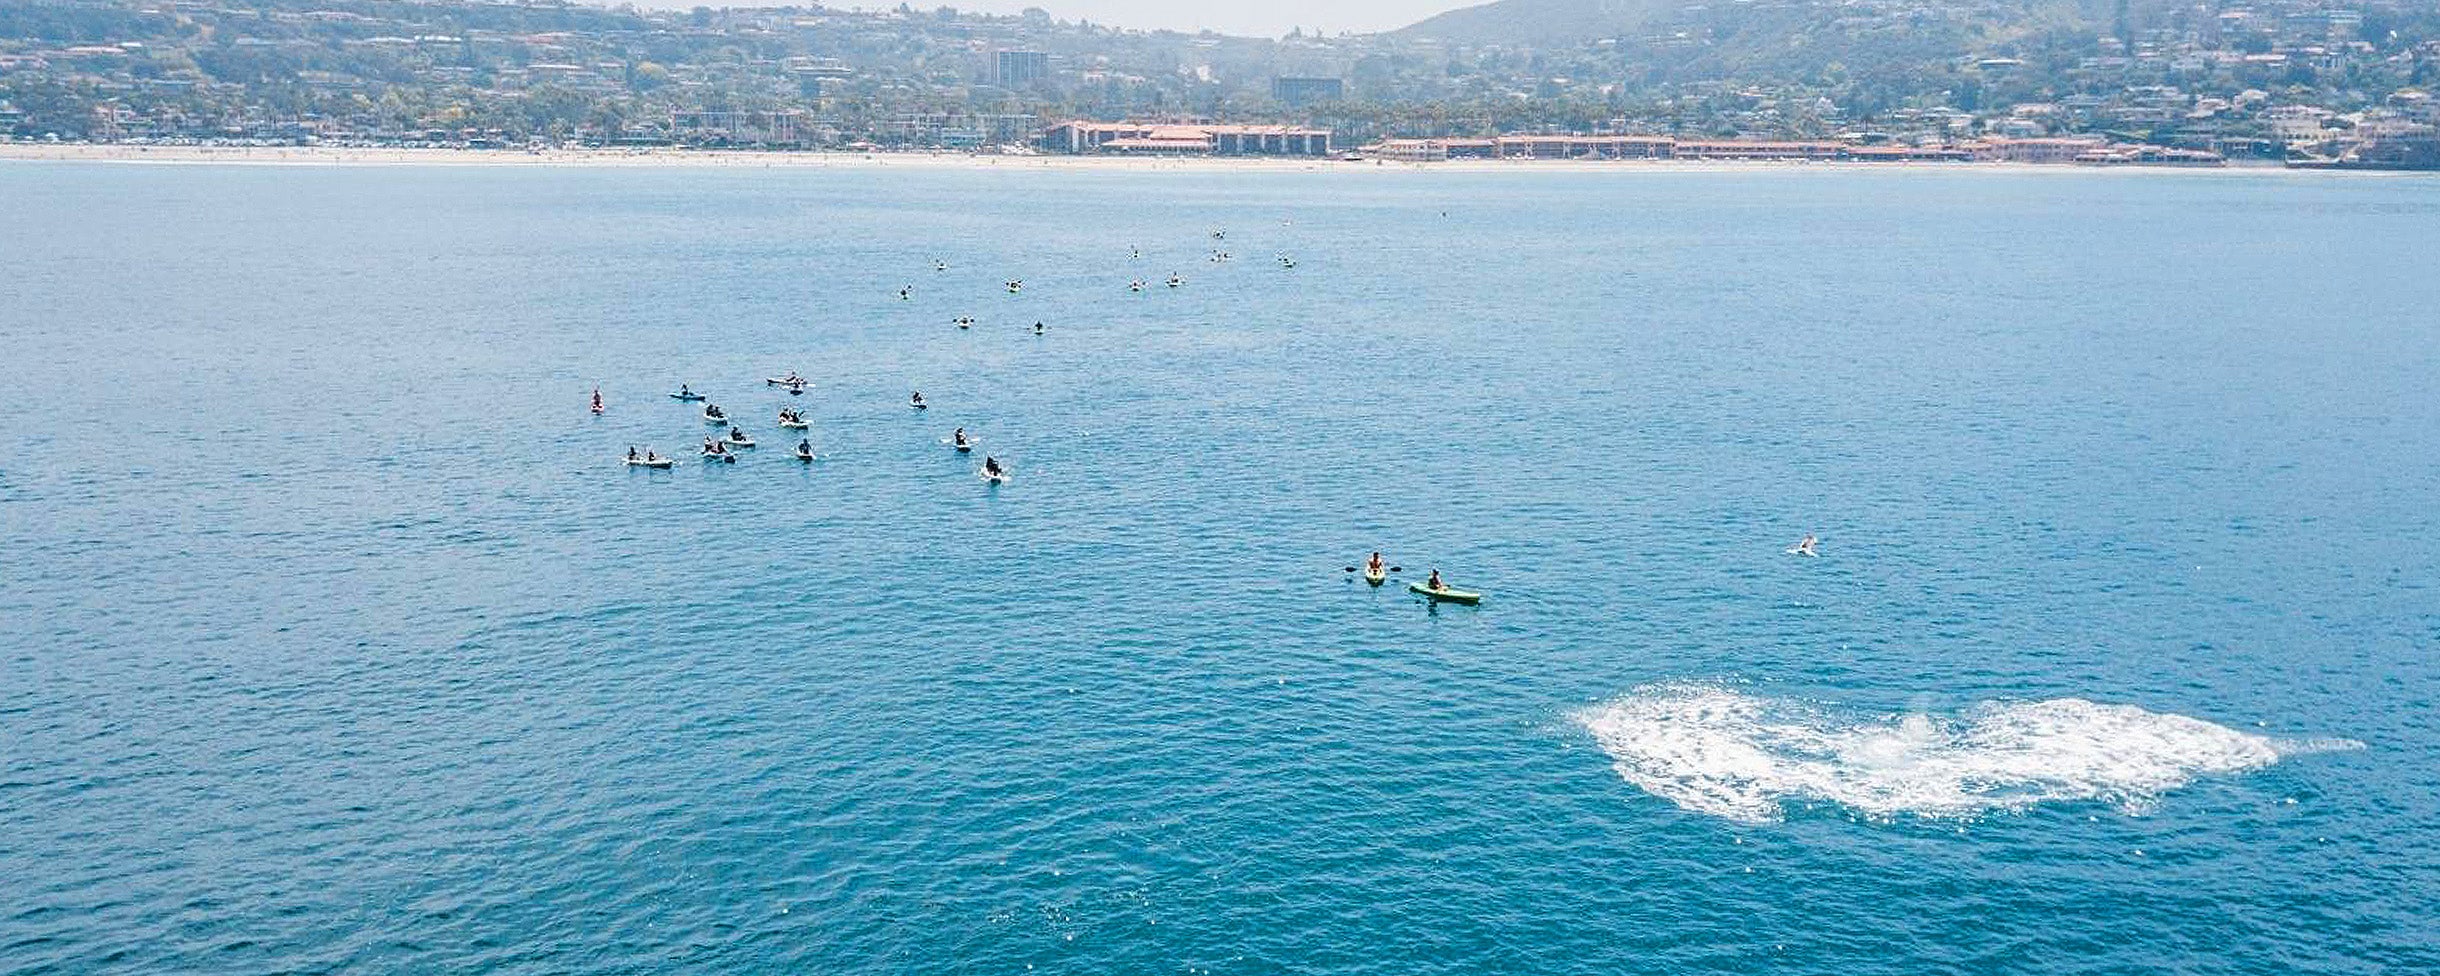 Overhead view of kayakers on an Everyday California tour on the Pacific Ocean in La Jolla, San Diego, California